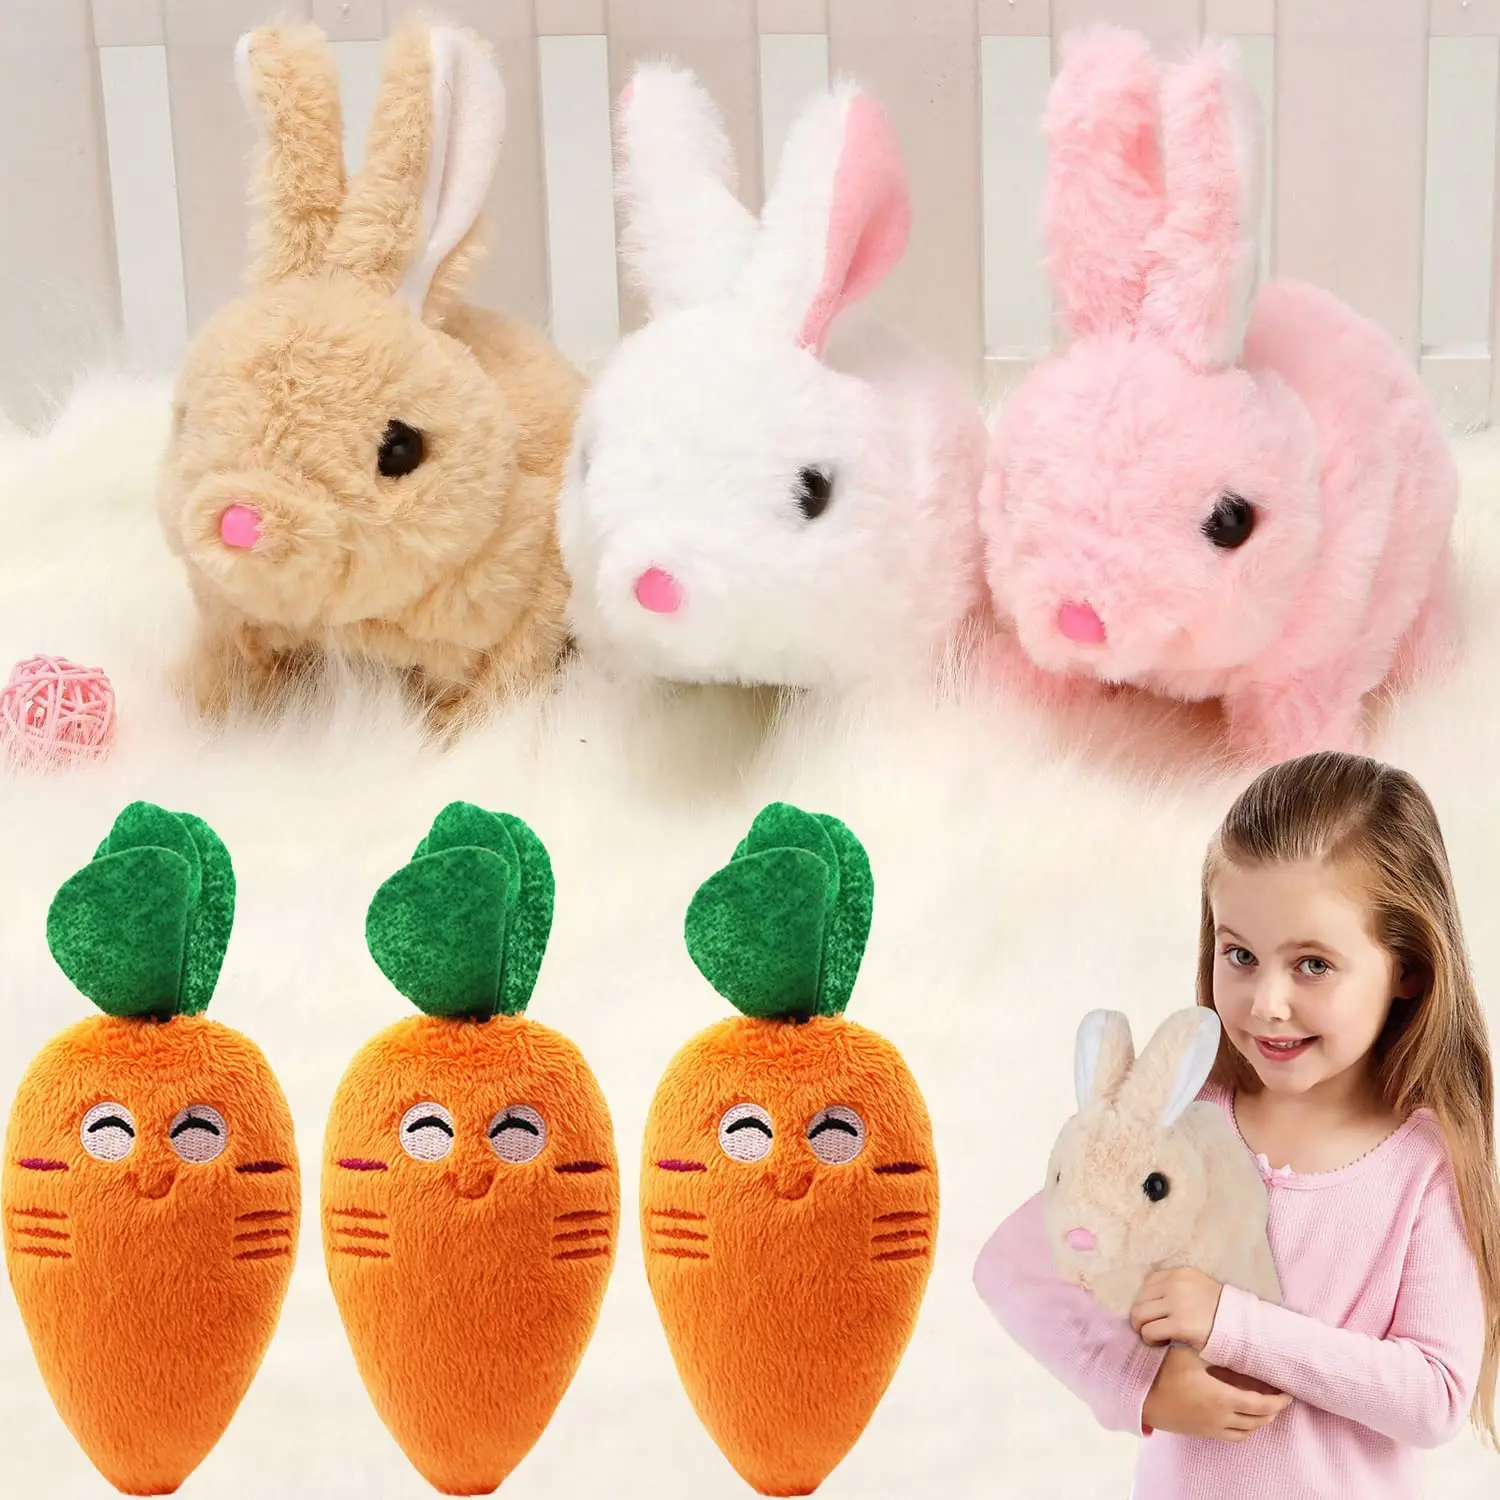 Bunny Toys Educational Interactive Toys Bunnies Can Walk and Talk, Easter Plush Stuffed Bunny Toy Walking Rabbit Educational Toy inflatable panda polar bear mascot costume carnival party dress up outfits for adults ad walking promotion halloween xmas easter